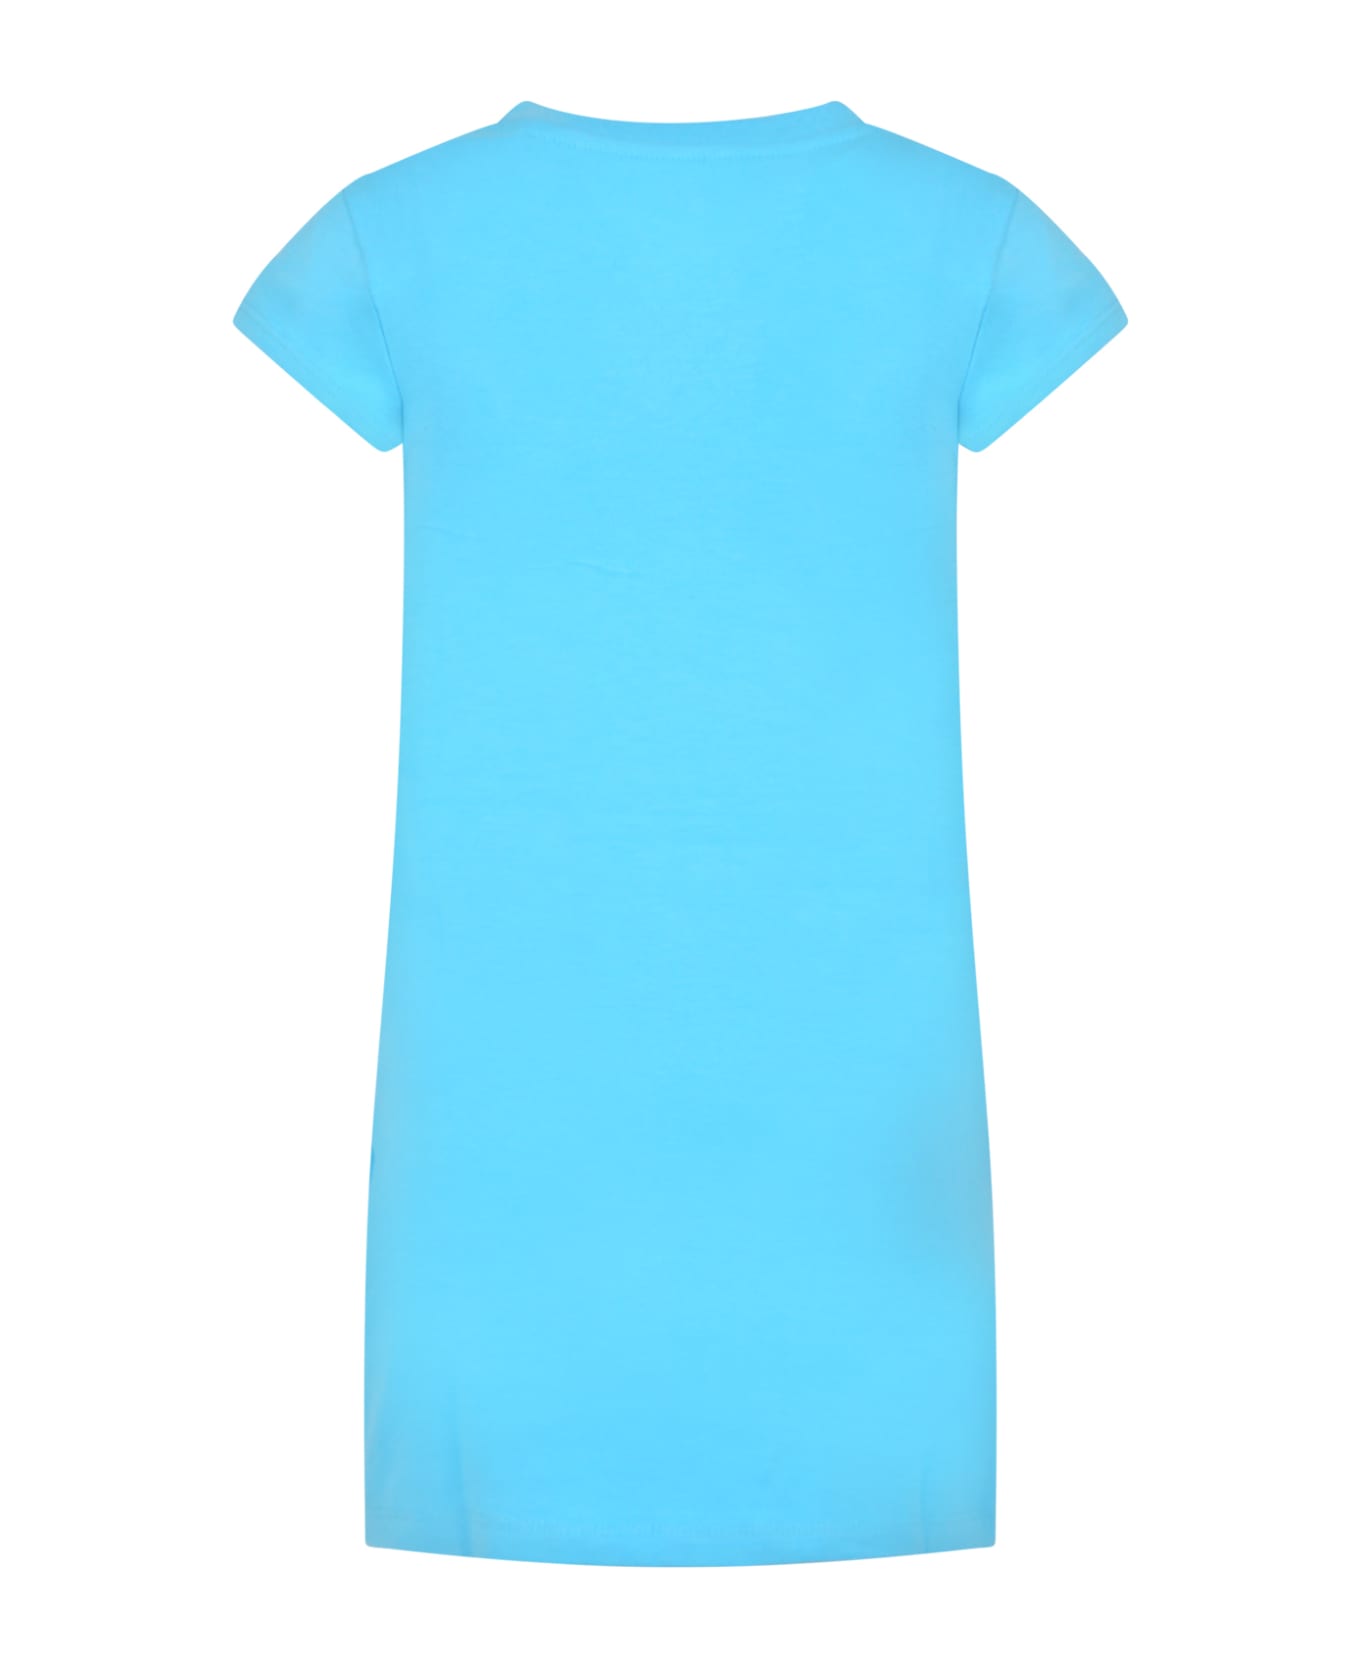 Nike Light Blue Dress For Girl With Iconic Swoosh - Light Blue